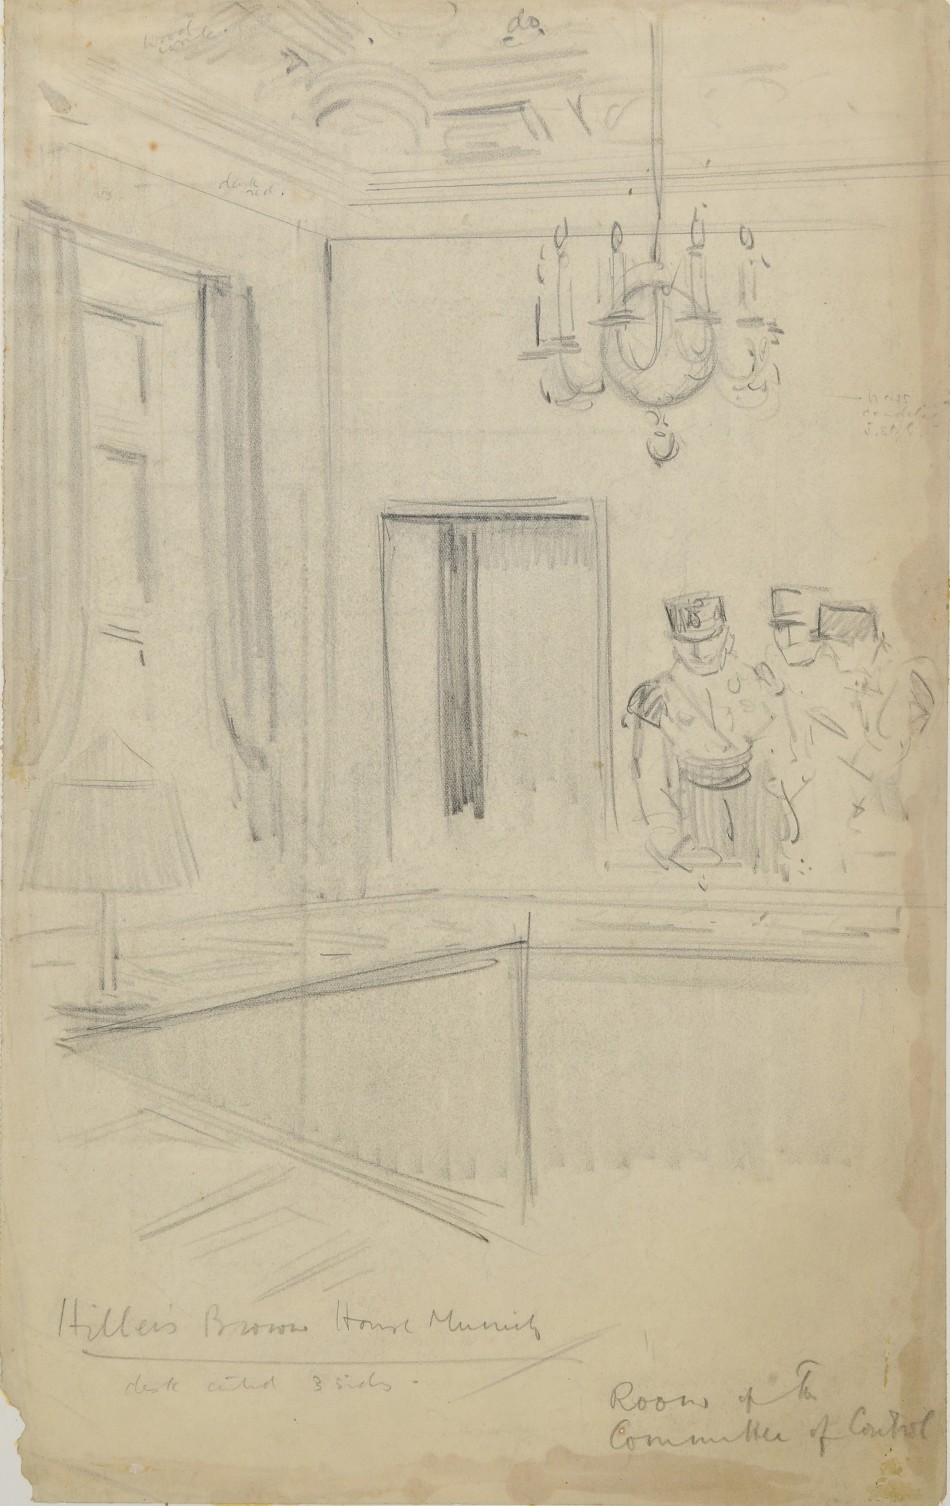 This drawing by Helen McKie shows Nazi officials inside a committee room at Hitlers Munich headquarters